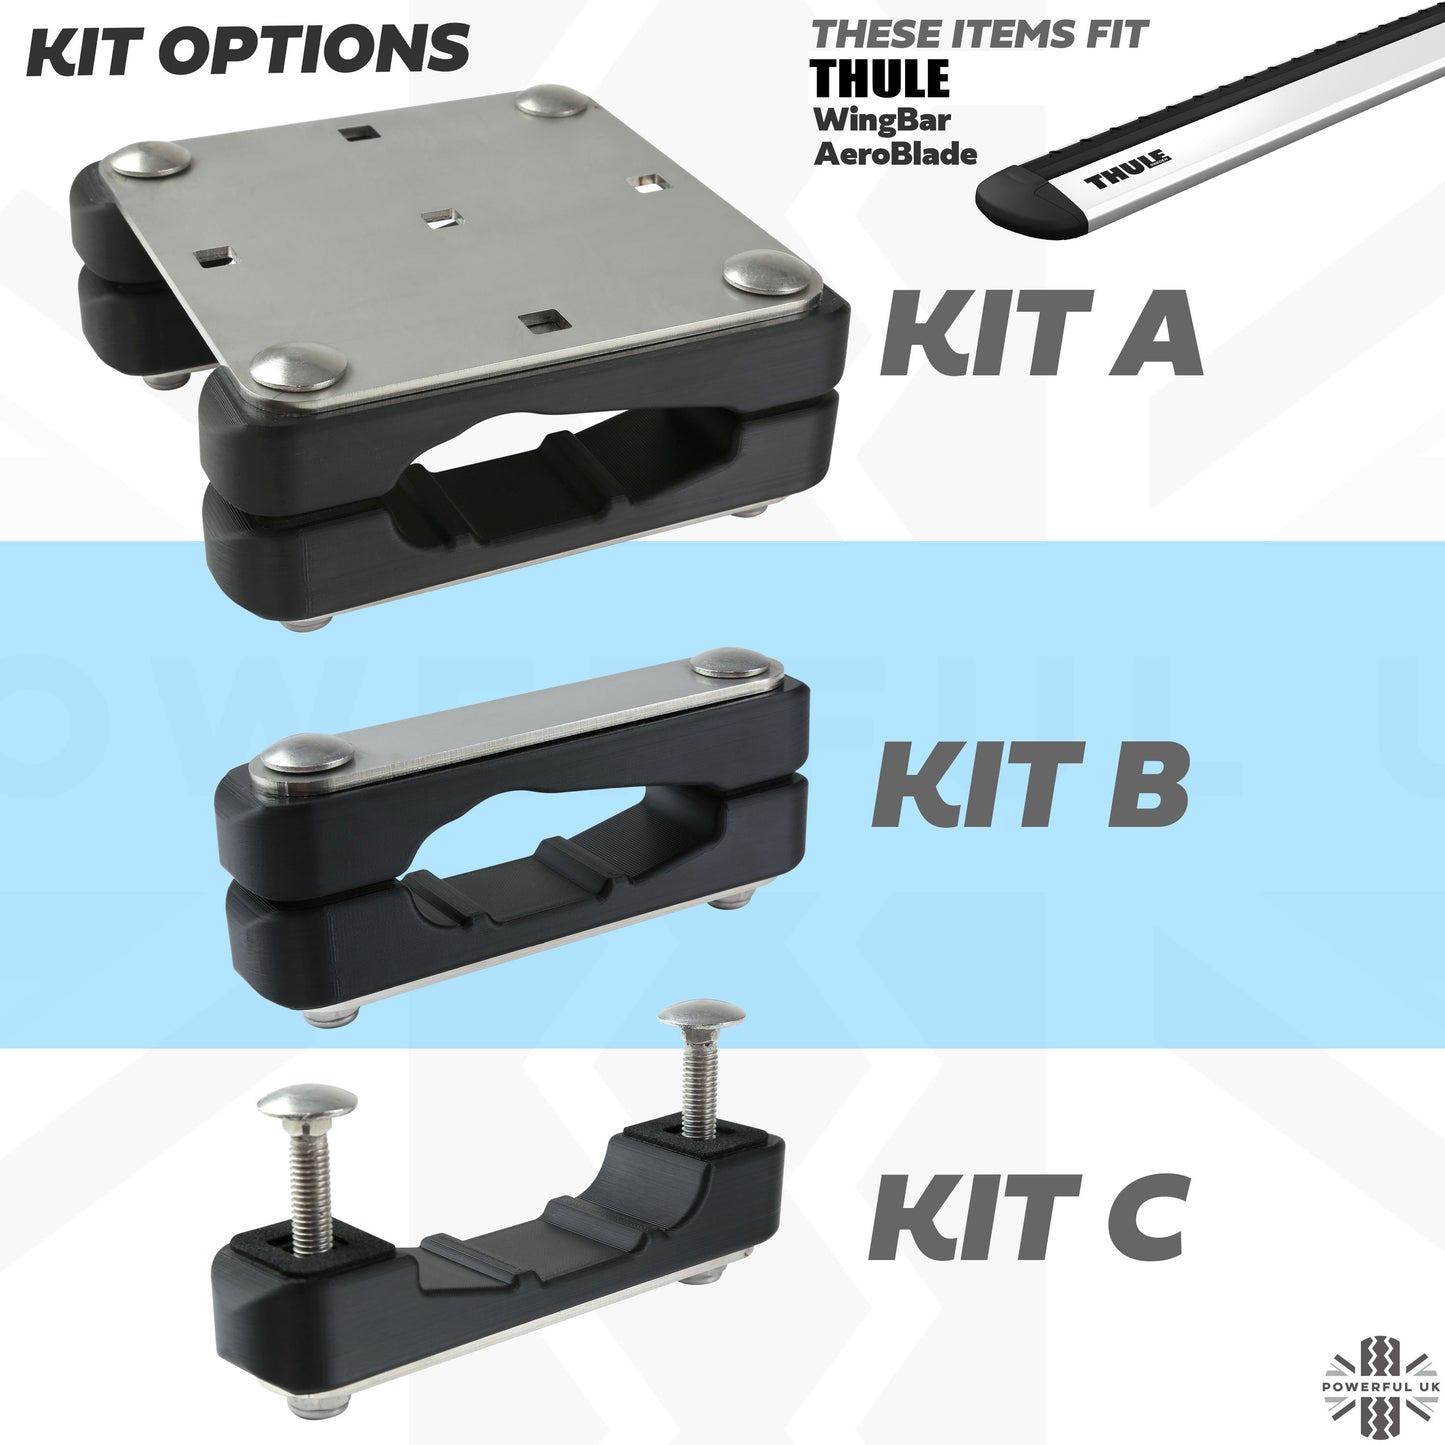 Roof Rack Mounting Clamp Kit for Thule Cross Bars - Kit A